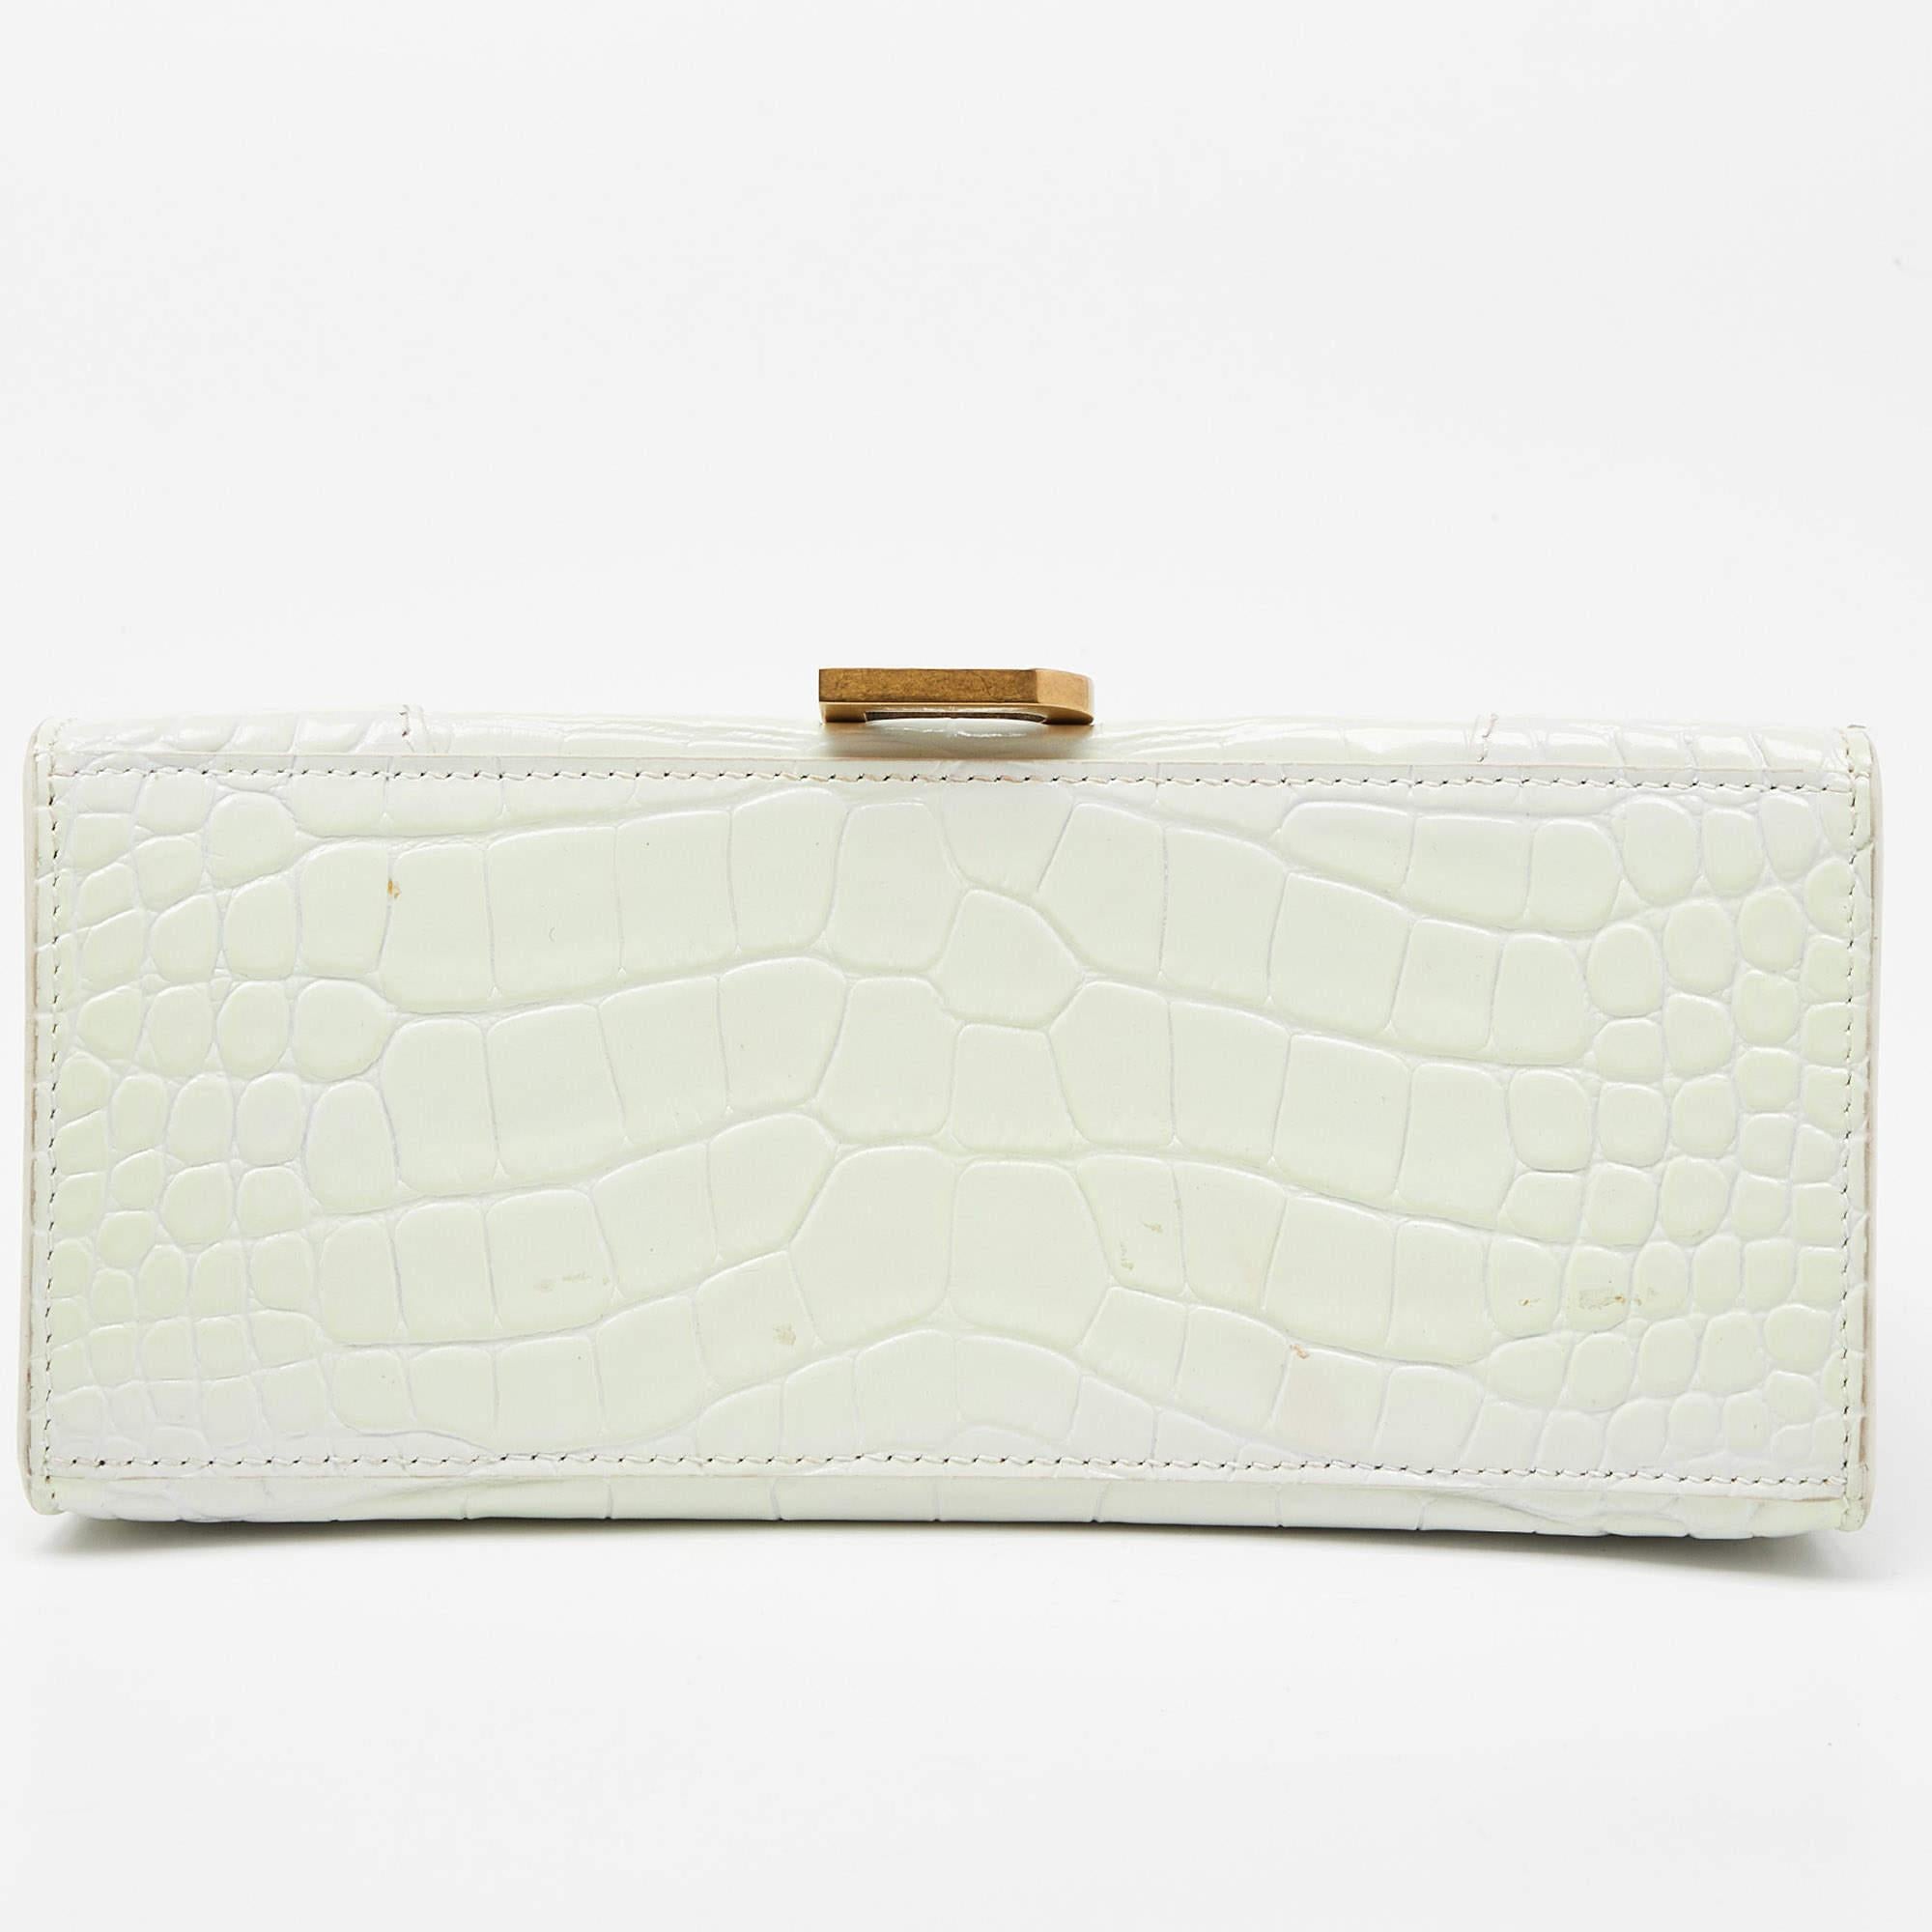 Balenciaga White Croc Embossed Leather Small Hourglass Top Handle Bag For Sale 1